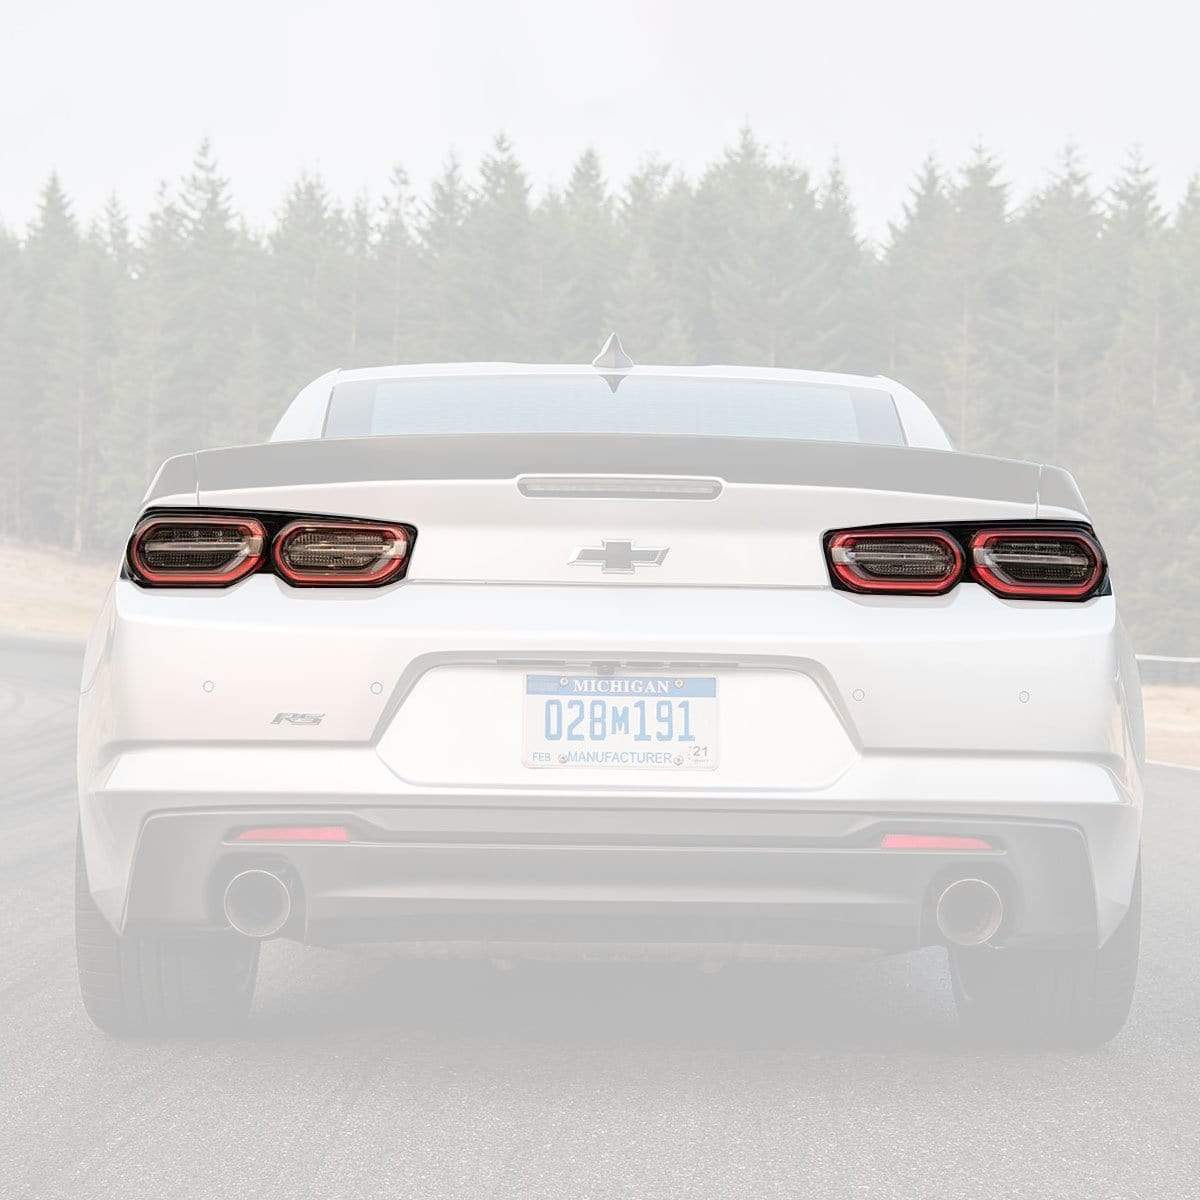 ACS Composite Gen6 Smoked Rear Signal Taillight Lamps for 2019-2023 Camaros - SKU [48-4-111]